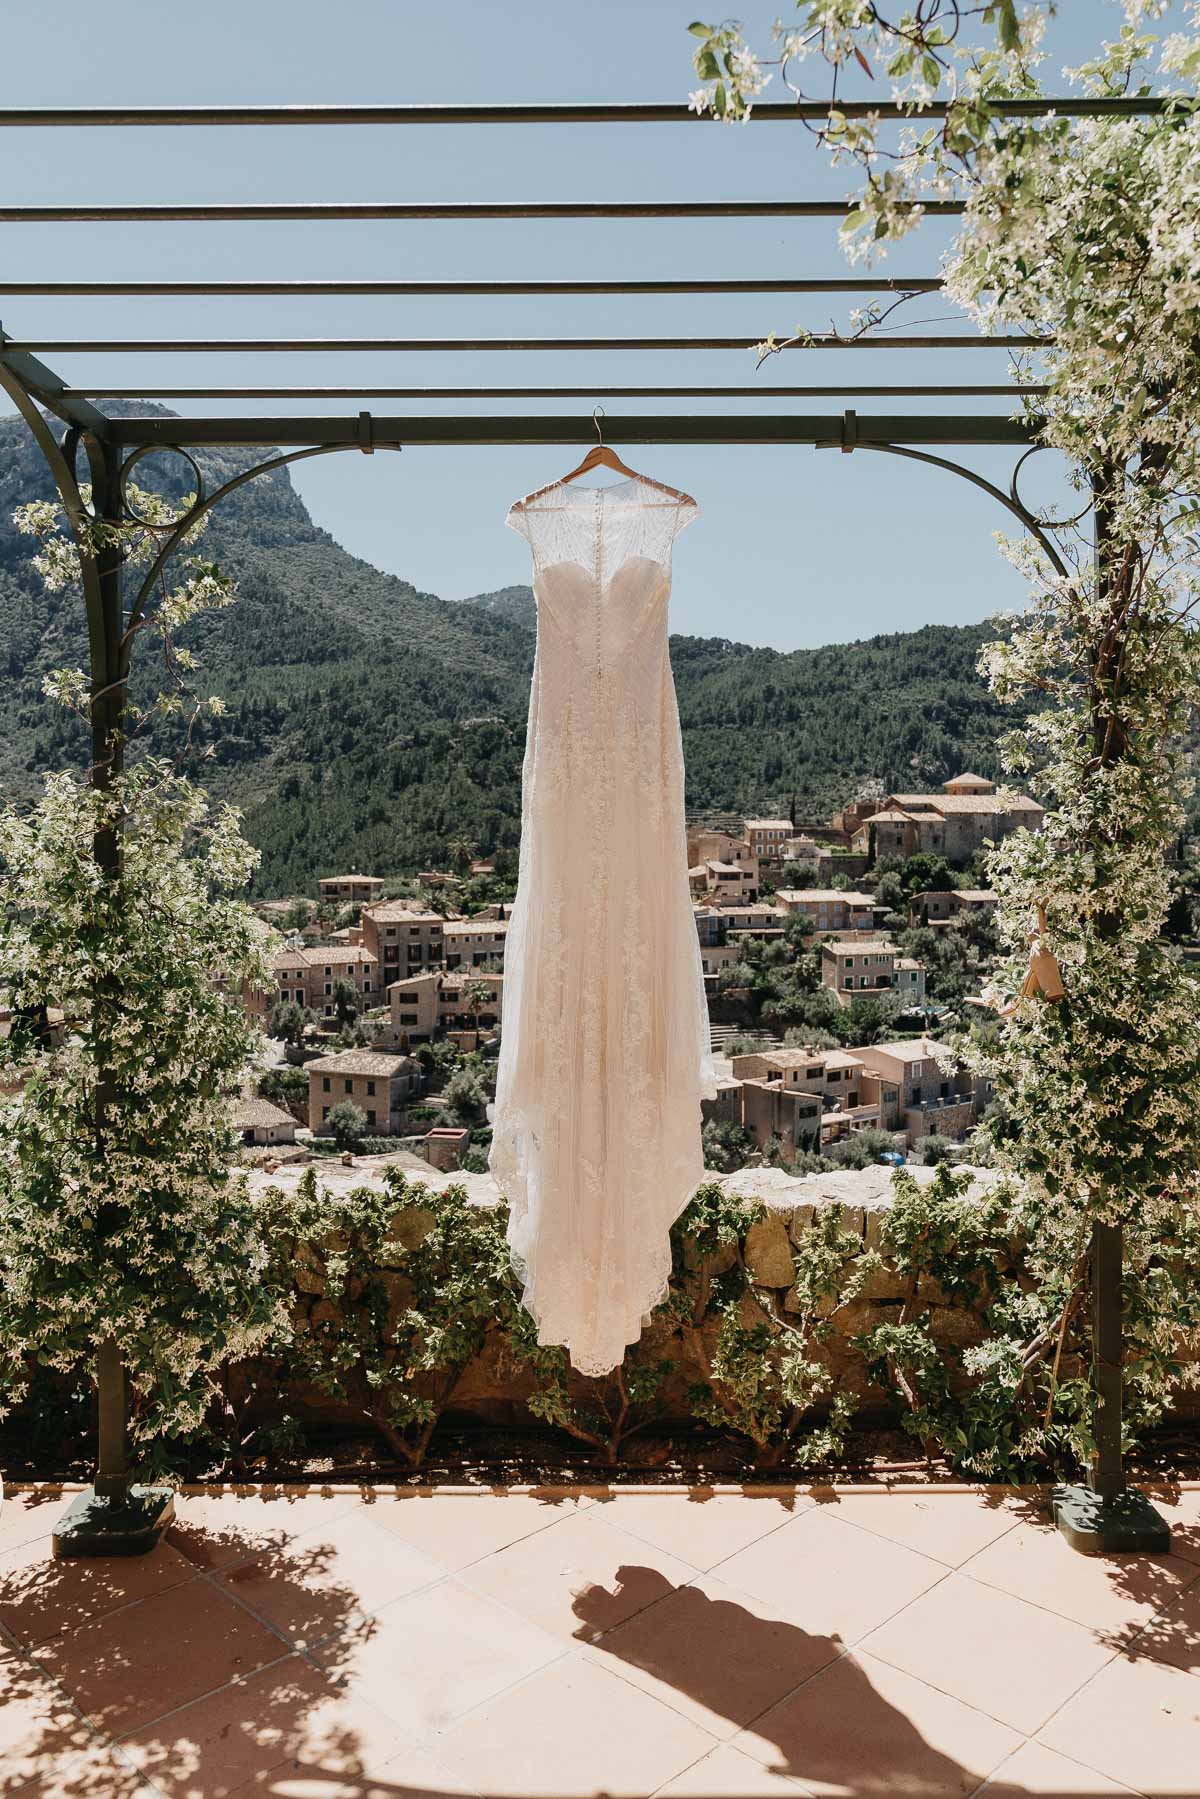 elopement photography in Spain: Dress hanging outdoors against scenic view in Mallorca, Spain